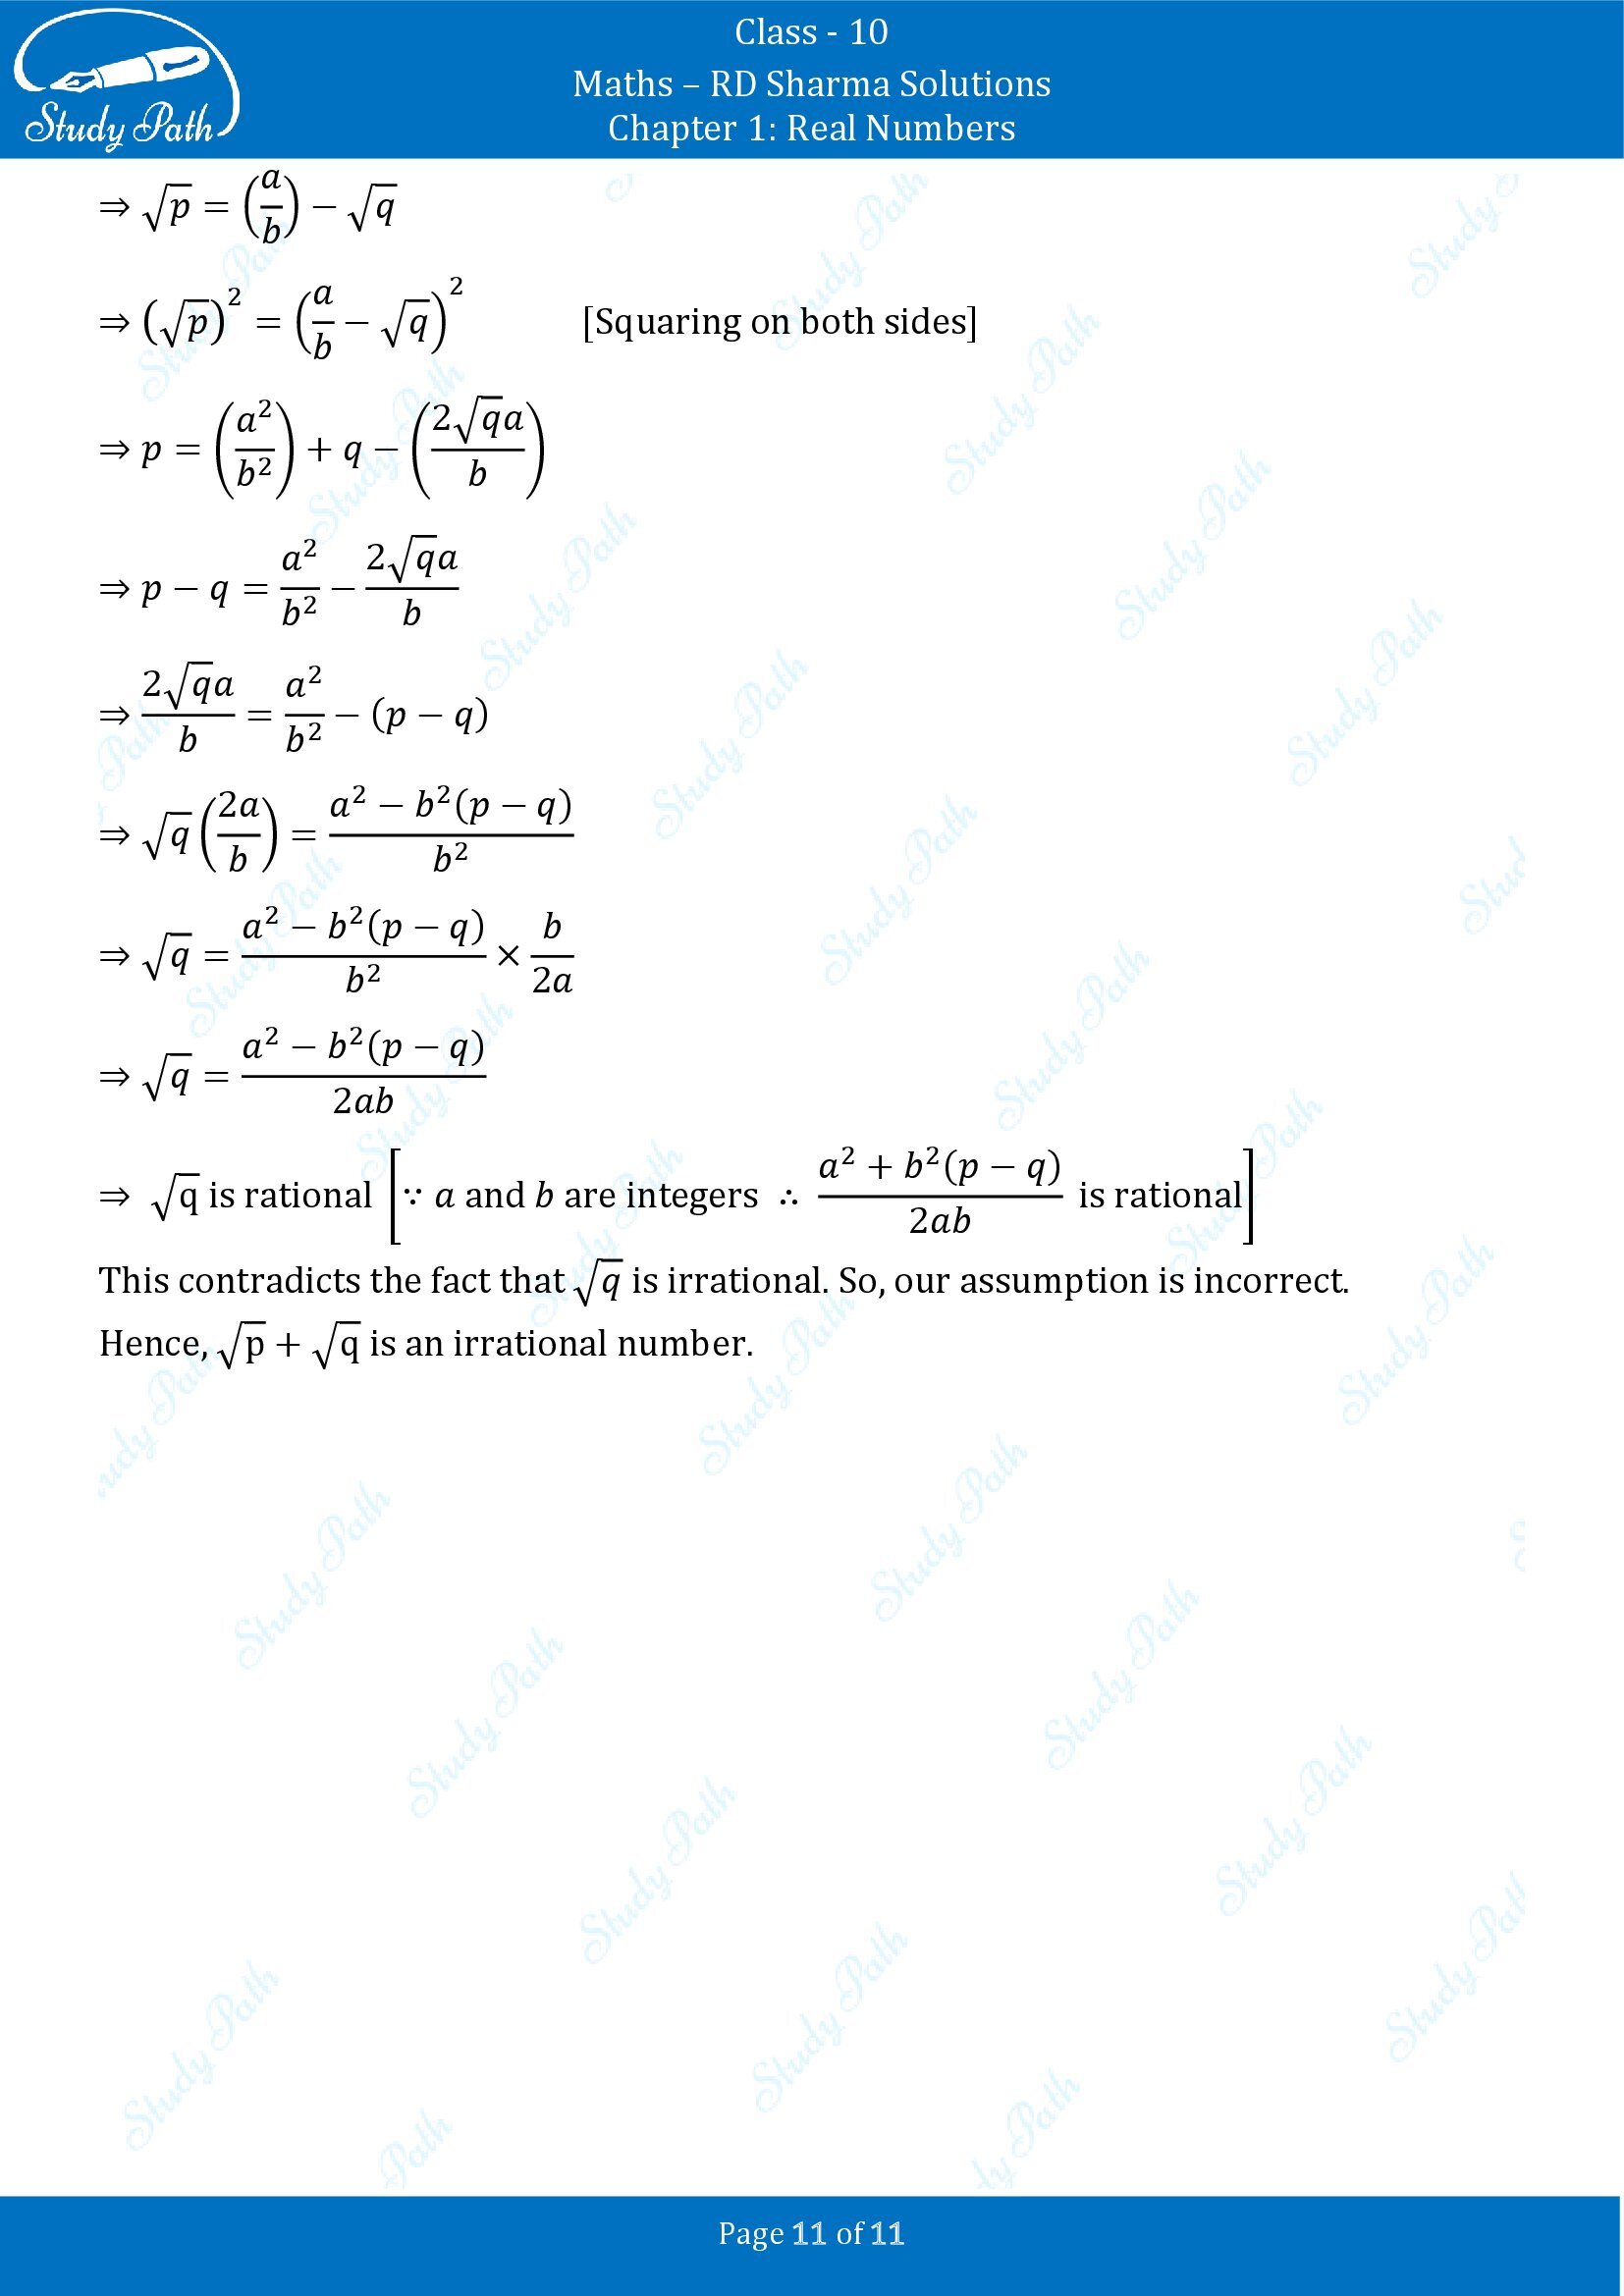 RD Sharma Solutions Class 10 Chapter 1 Real Numbers Exercise 1.5 00011